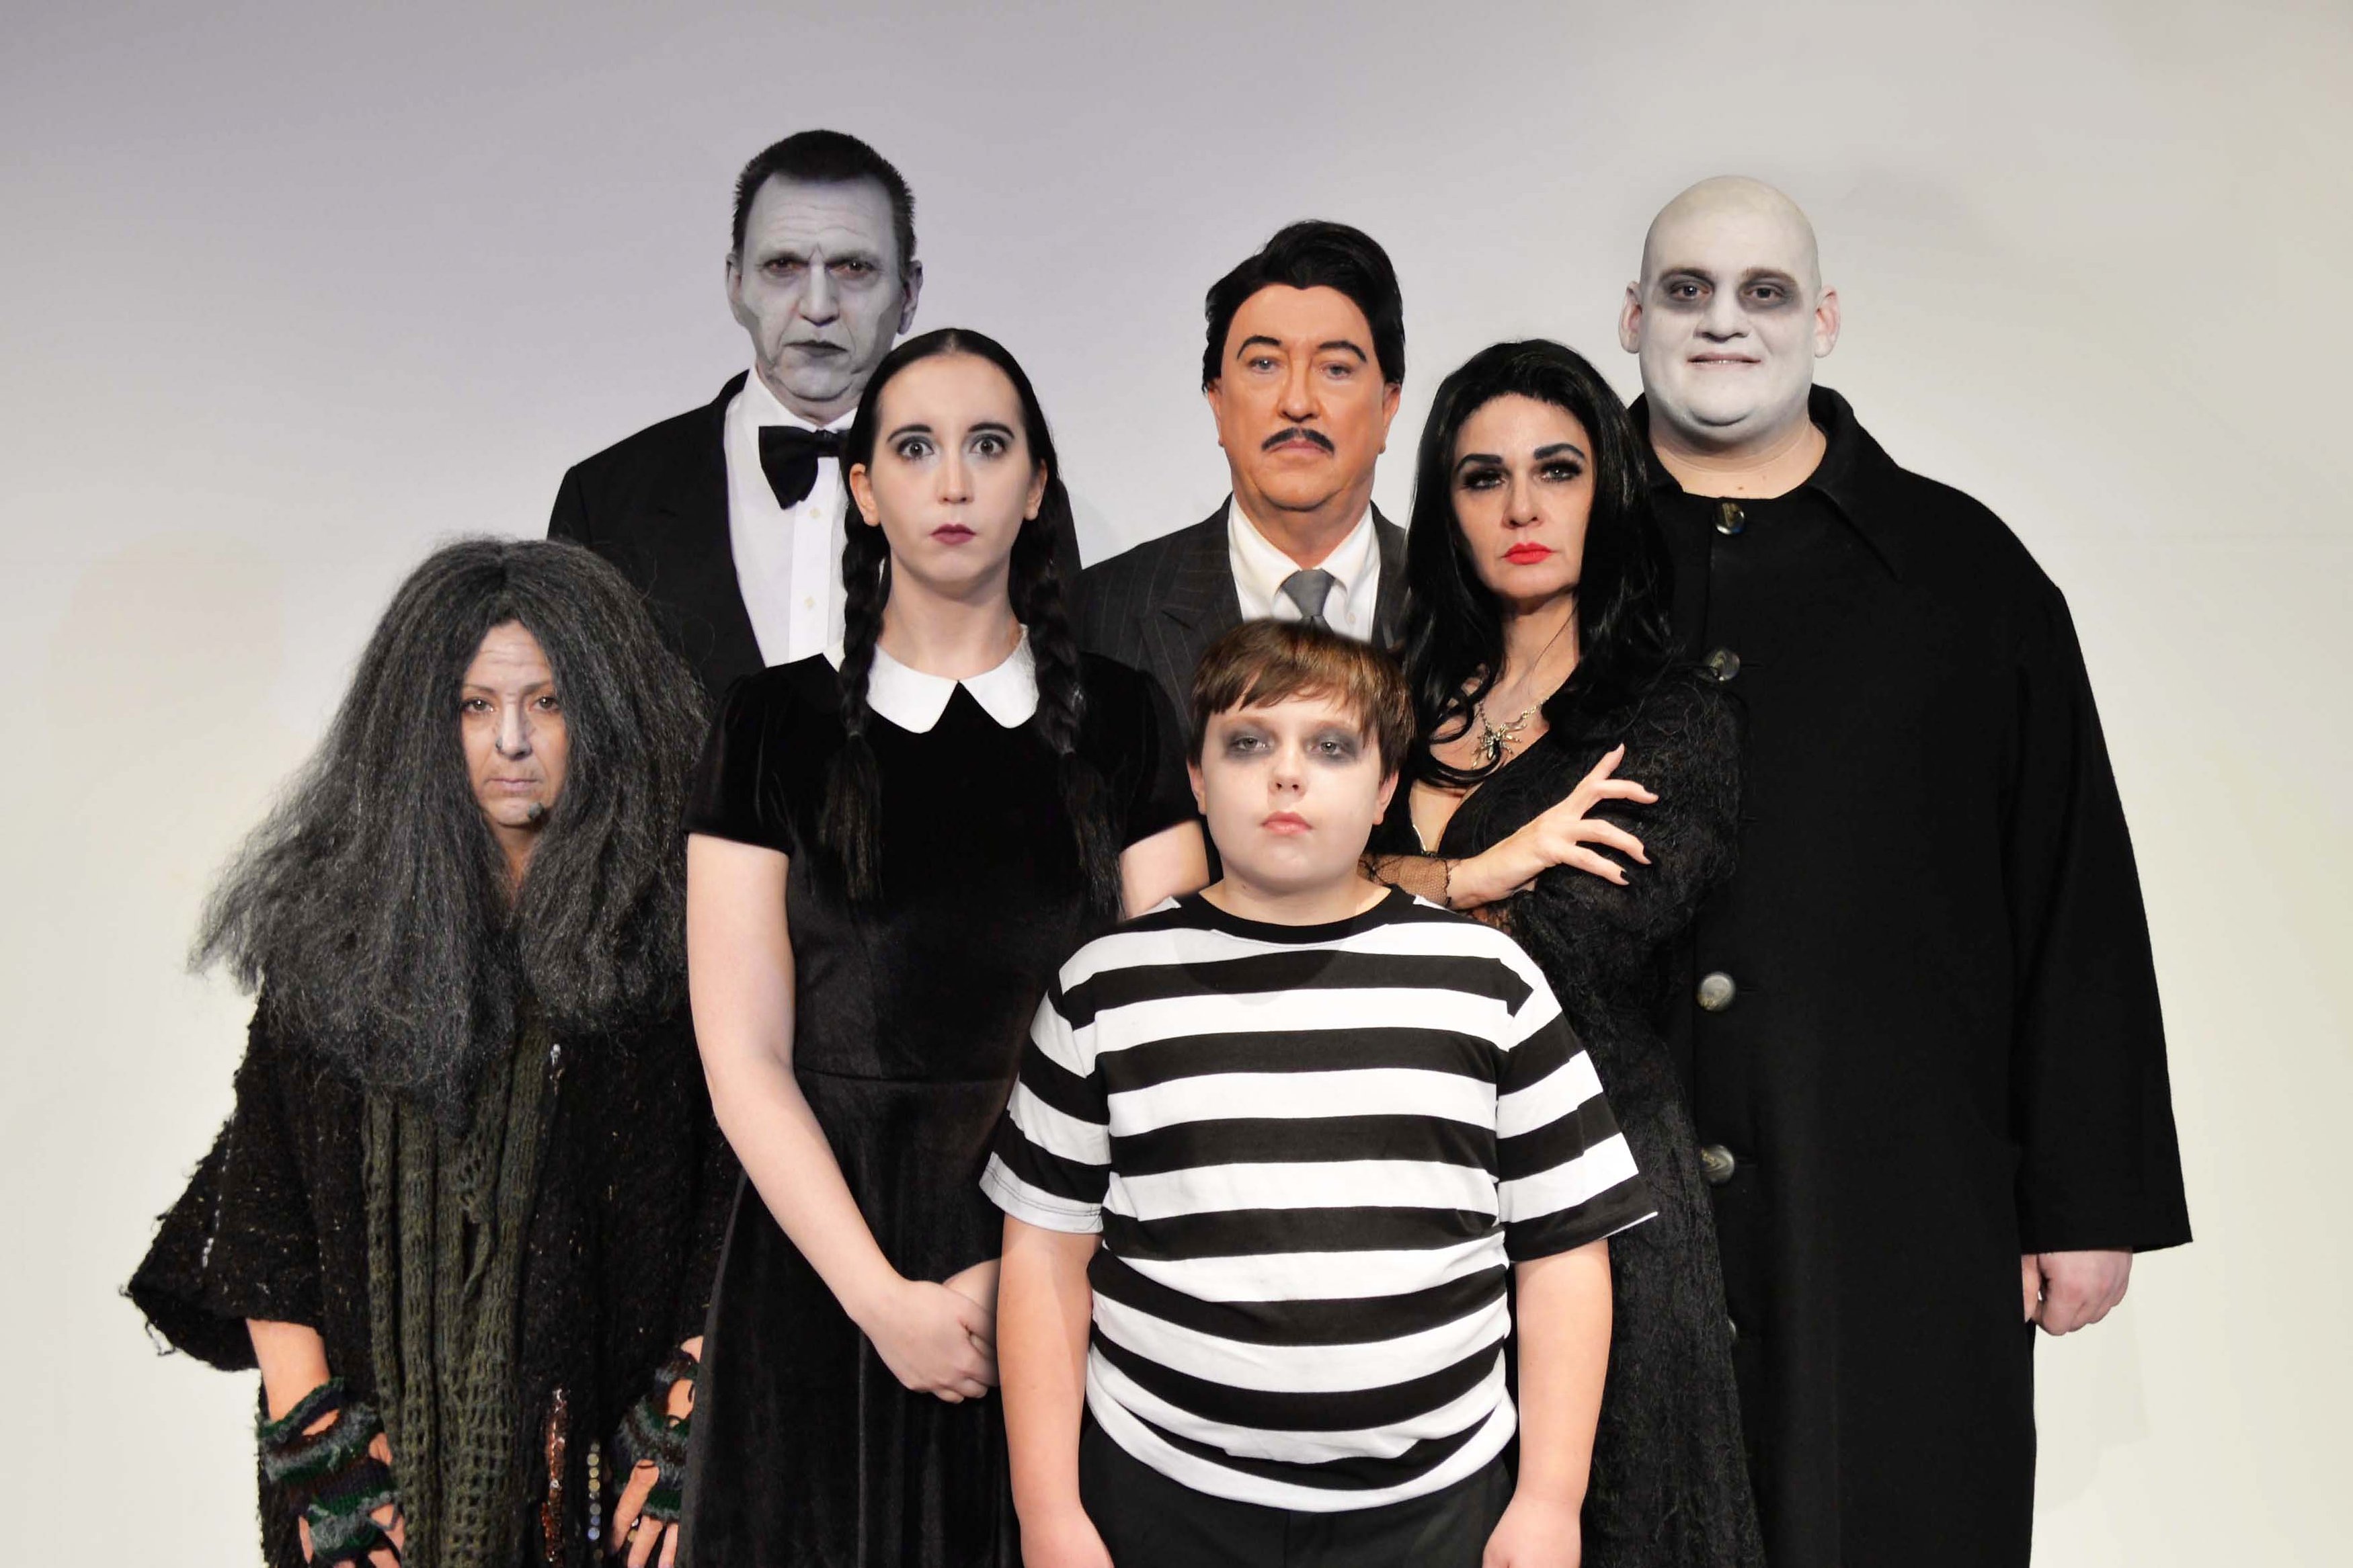 The Addams Family HD wallpapers, Desktop wallpaper - most viewed